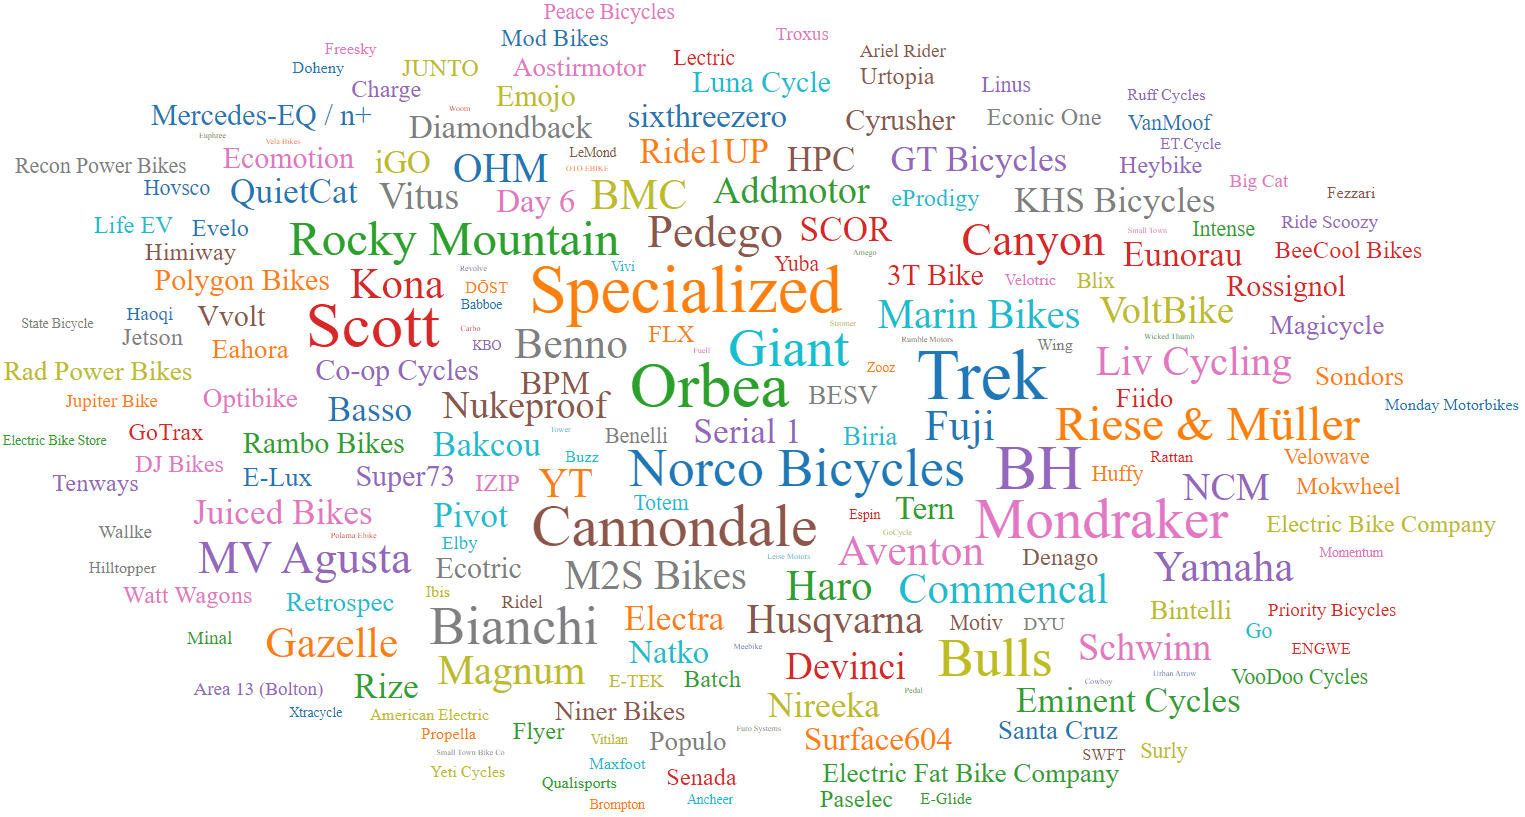 word cloud of e-bike brand names scaled by number of models and sizes listed